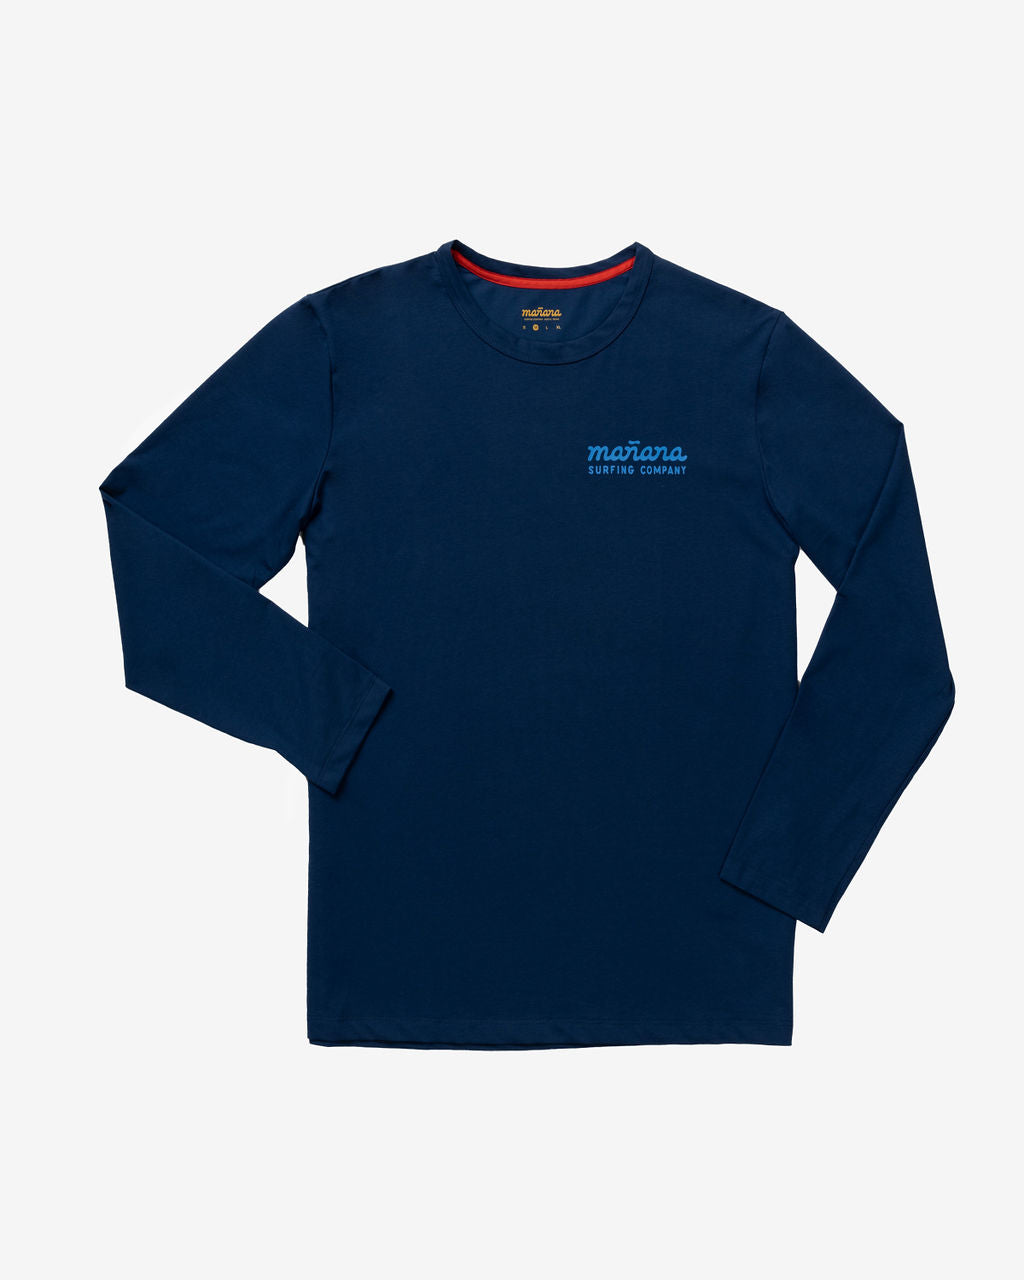 Surfing Company LS - Navy